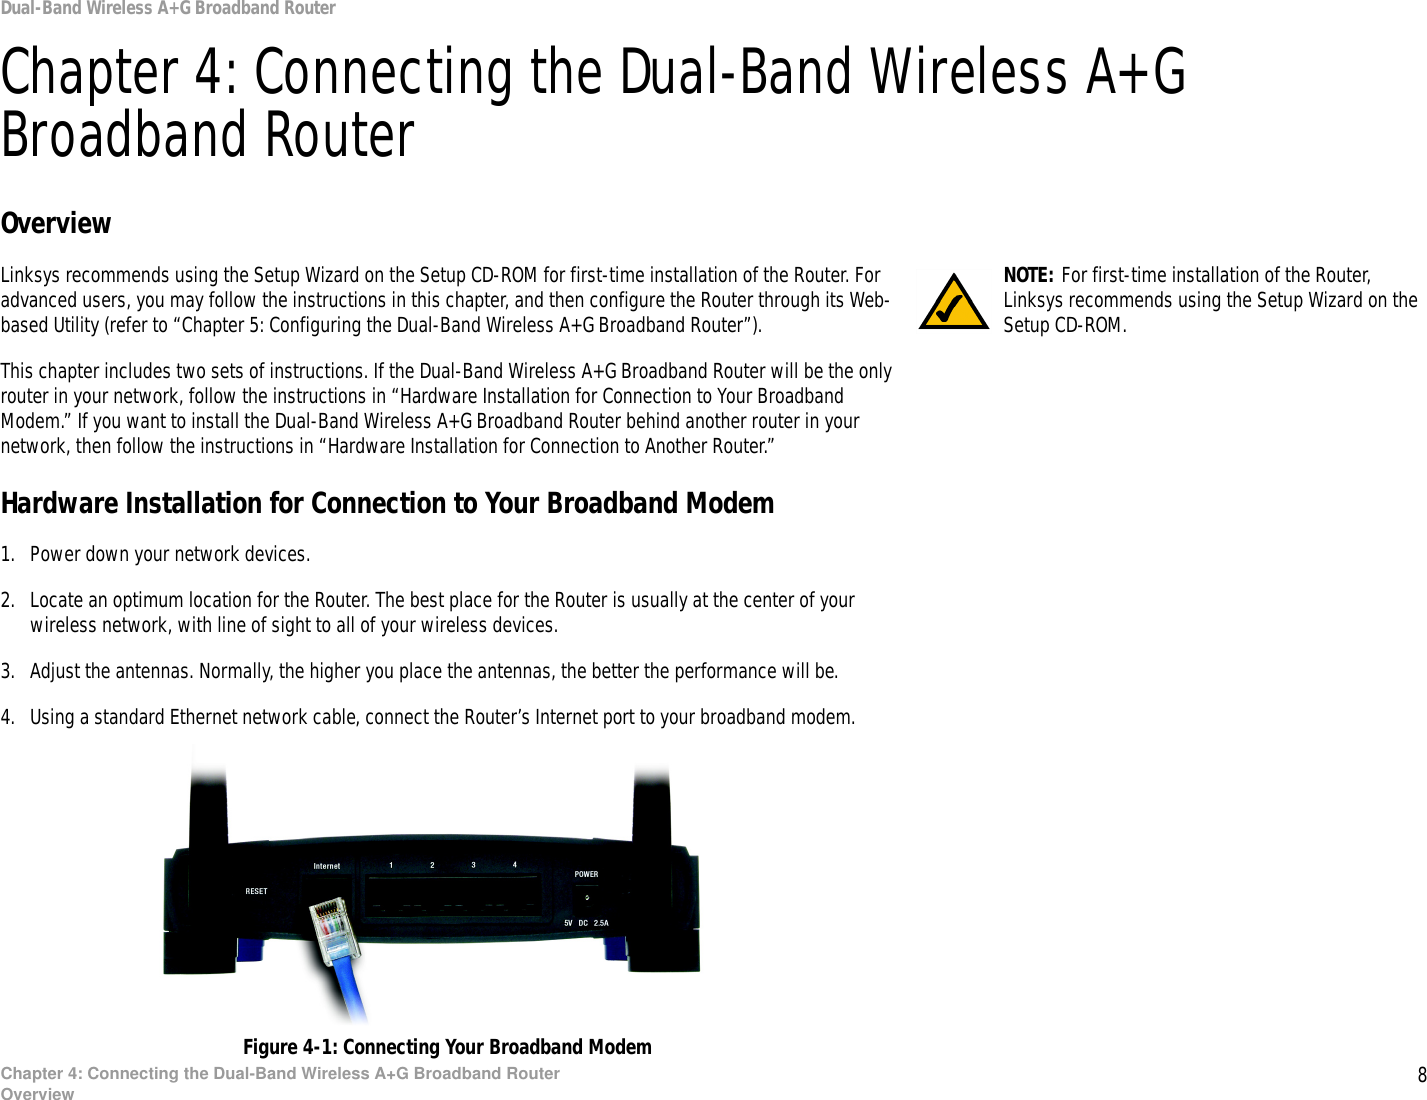 8Chapter 4: Connecting the Dual-Band Wireless A+G Broadband RouterOverviewDual-Band Wireless A+G Broadband RouterChapter 4: Connecting the Dual-Band Wireless A+G Broadband RouterOverviewLinksys recommends using the Setup Wizard on the Setup CD-ROM for first-time installation of the Router. For advanced users, you may follow the instructions in this chapter, and then configure the Router through its Web-based Utility (refer to “Chapter 5: Configuring the Dual-Band Wireless A+G Broadband Router”).This chapter includes two sets of instructions. If the Dual-Band Wireless A+G Broadband Router will be the only router in your network, follow the instructions in “Hardware Installation for Connection to Your Broadband Modem.” If you want to install the Dual-Band Wireless A+G Broadband Router behind another router in your network, then follow the instructions in “Hardware Installation for Connection to Another Router.”Hardware Installation for Connection to Your Broadband Modem1. Power down your network devices.2. Locate an optimum location for the Router. The best place for the Router is usually at the center of your wireless network, with line of sight to all of your wireless devices.3. Adjust the antennas. Normally, the higher you place the antennas, the better the performance will be.4. Using a standard Ethernet network cable, connect the Router’s Internet port to your broadband modem.Figure 4-1: Connecting Your Broadband ModemNOTE: For first-time installation of the Router, Linksys recommends using the Setup Wizard on the Setup CD-ROM.